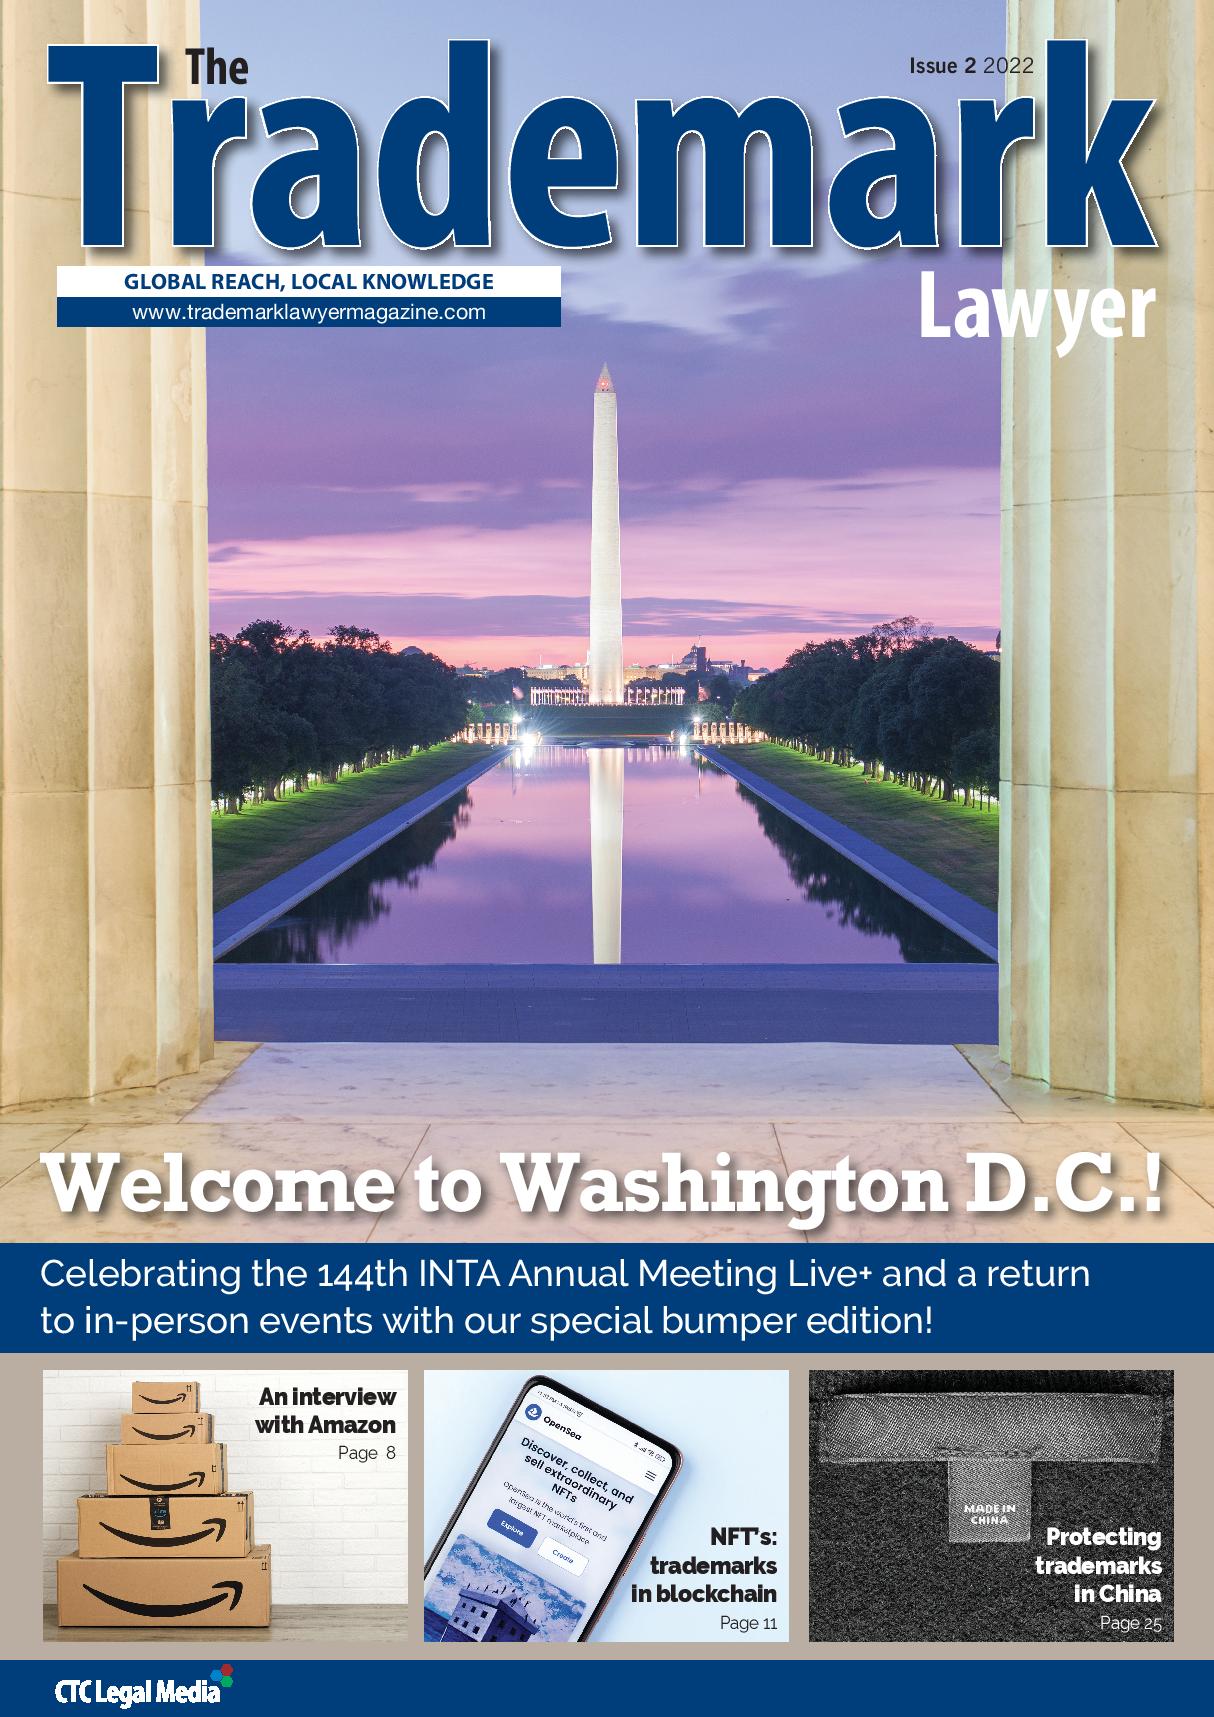 The Trademark Lawyer Issue 1 2022